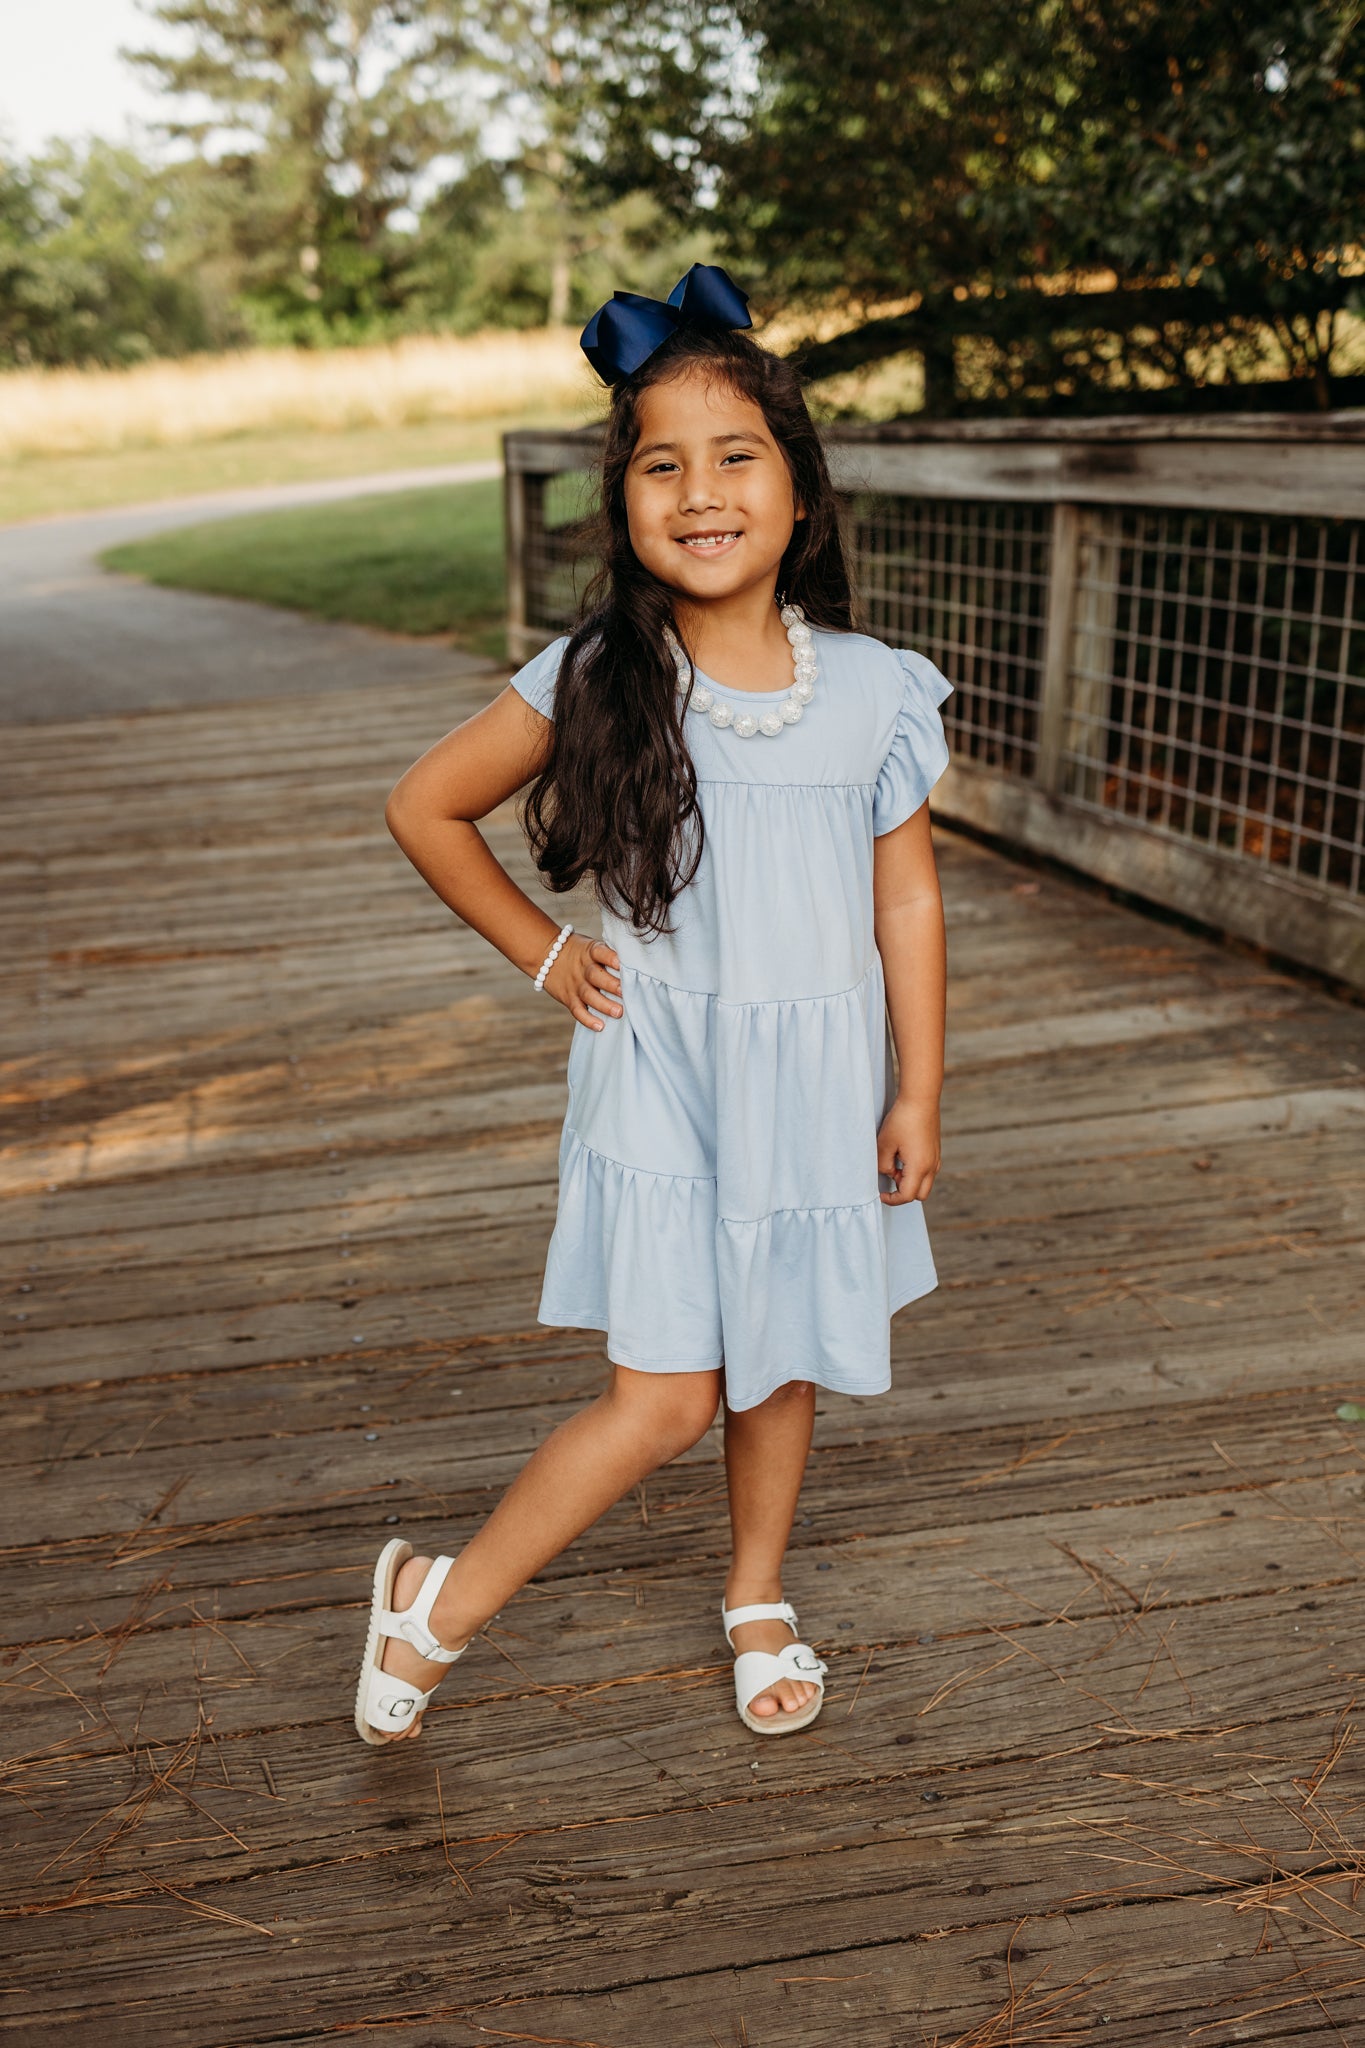 Girls Cap Sleeve Tiered Dresses {Ready to Ship} Children's